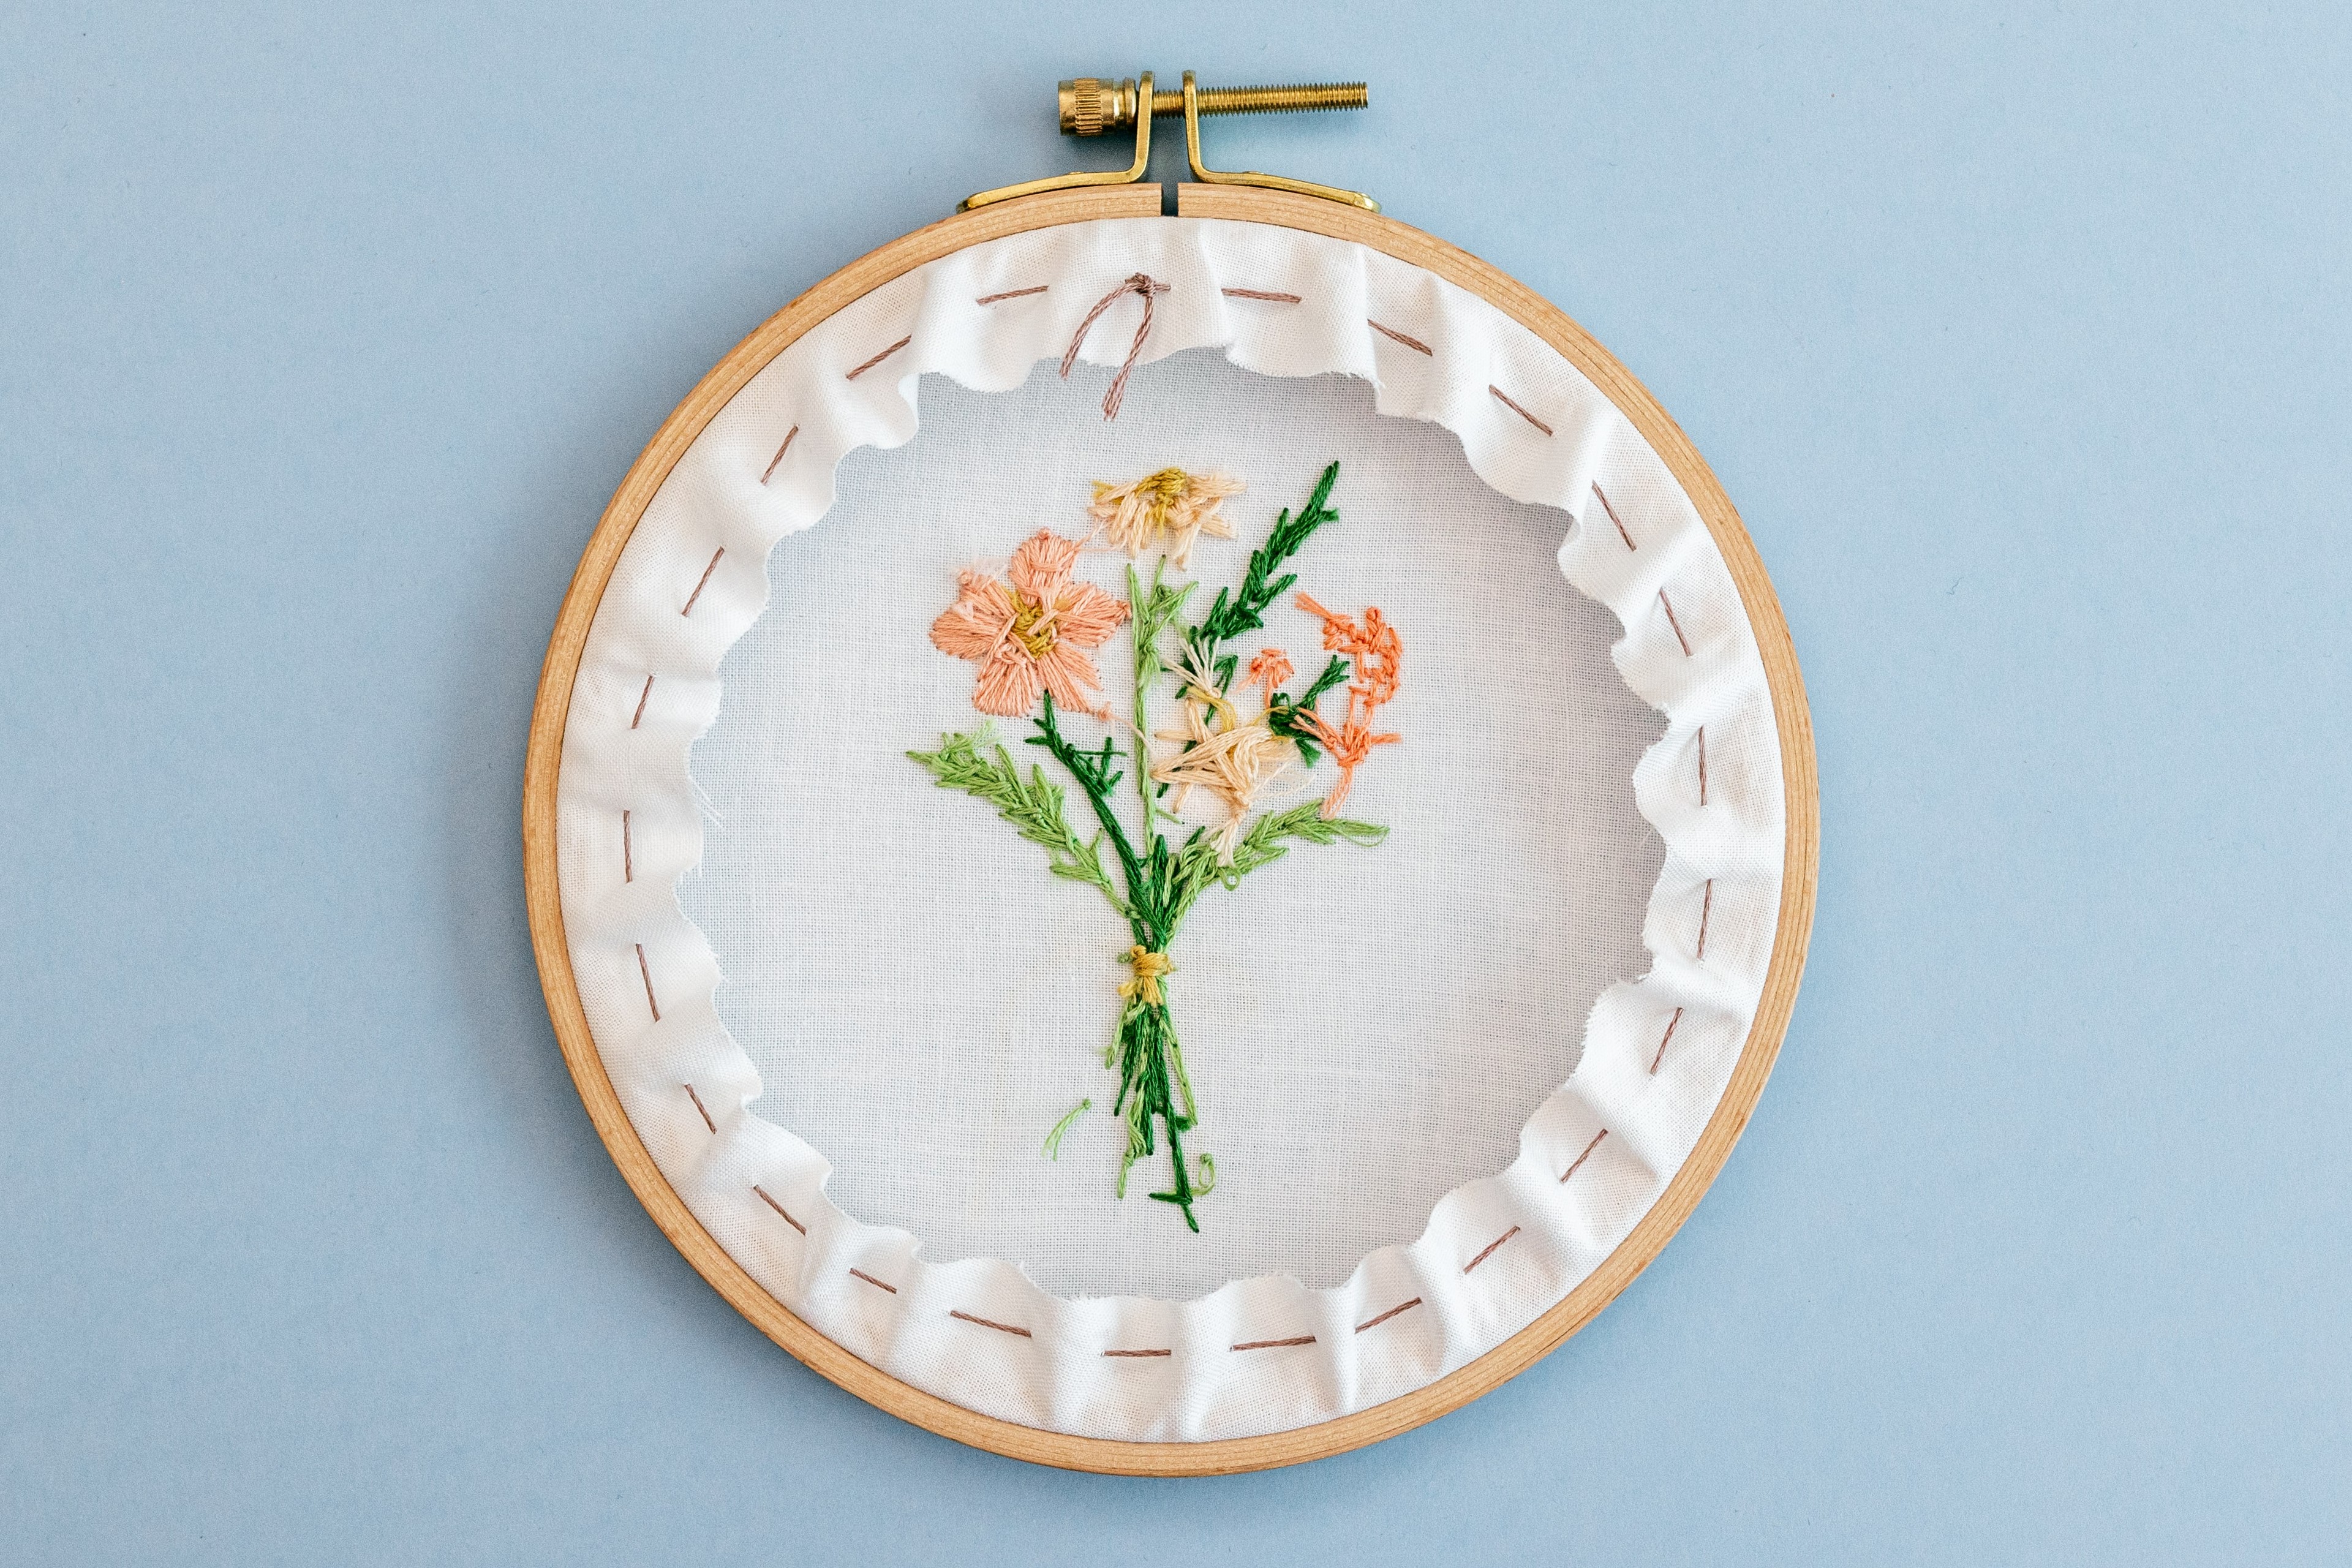 A finished hoop lies on the table, with a running stitch back.